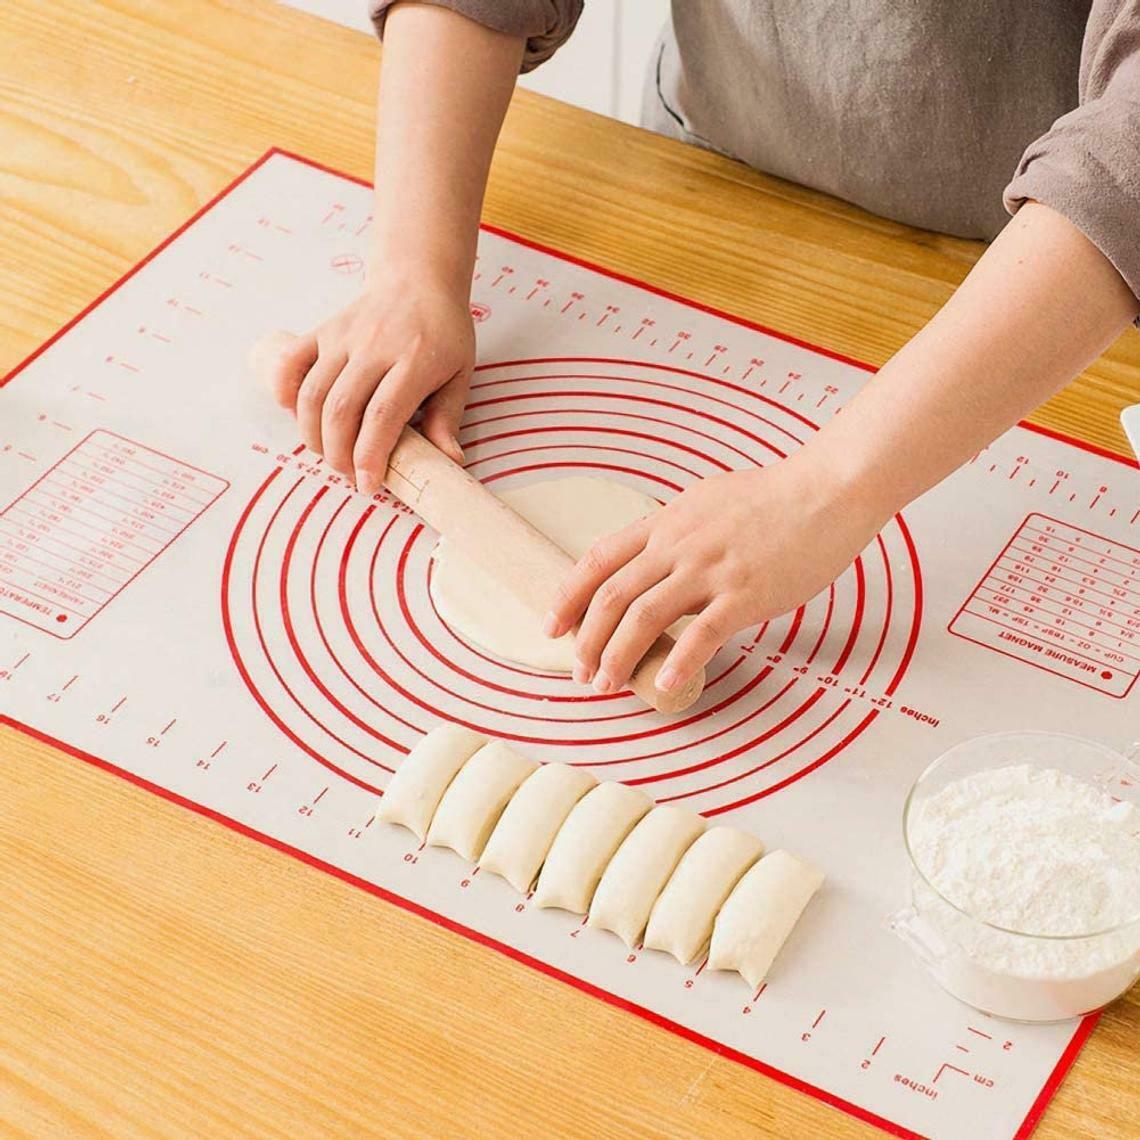 2 Pack Silicone, Non Slip, Measurement Pastry Mat